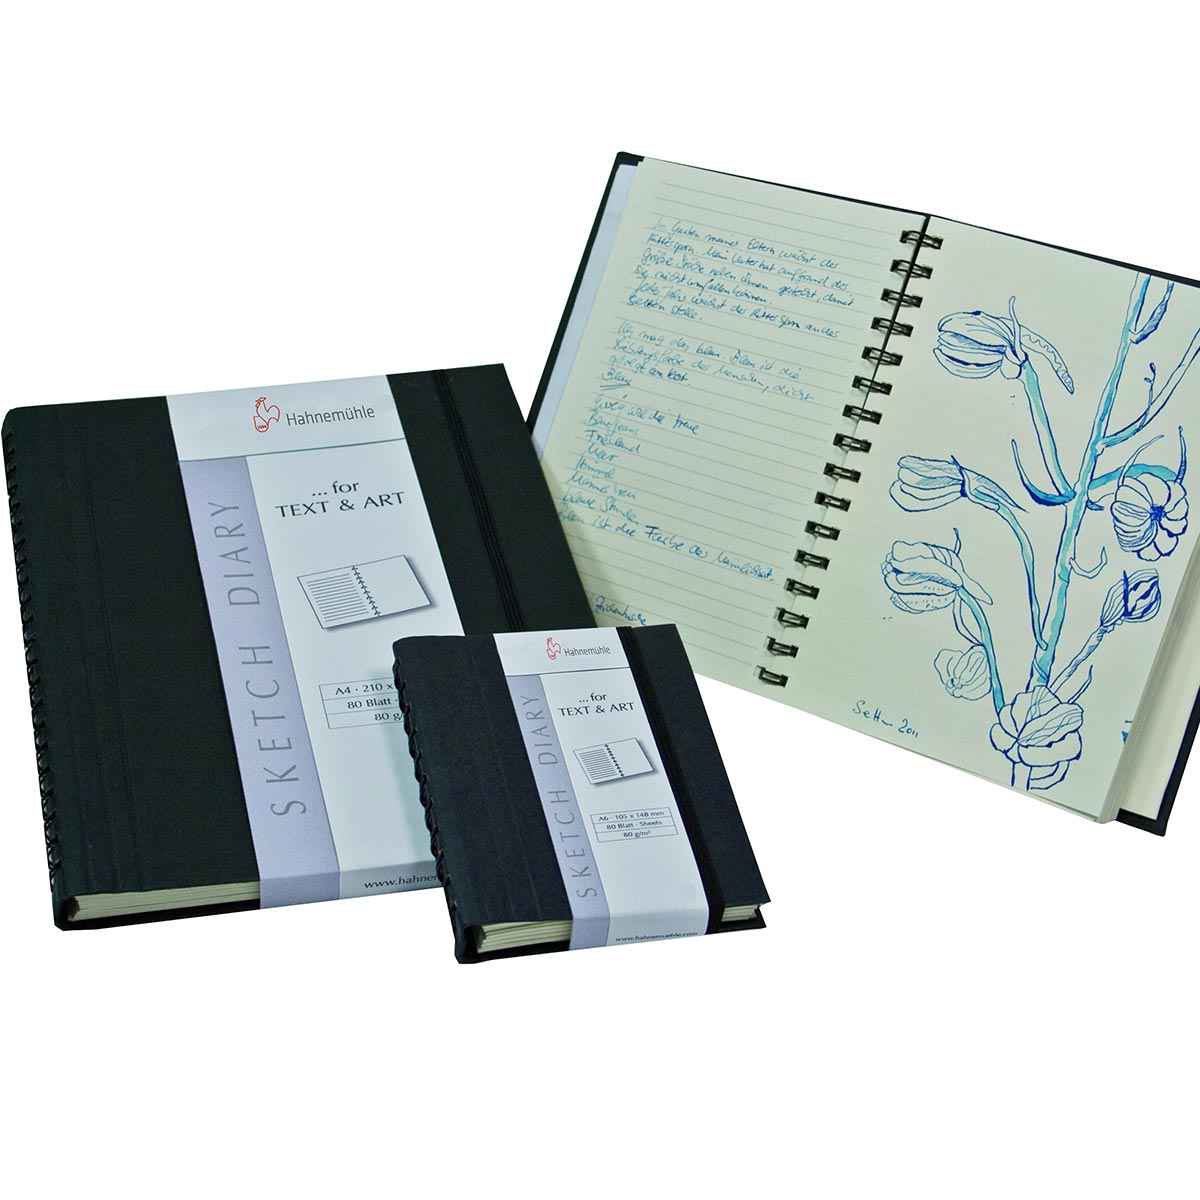 Hahnemuhle - Sketch Diary - A4 120gsm - 60 feuilles